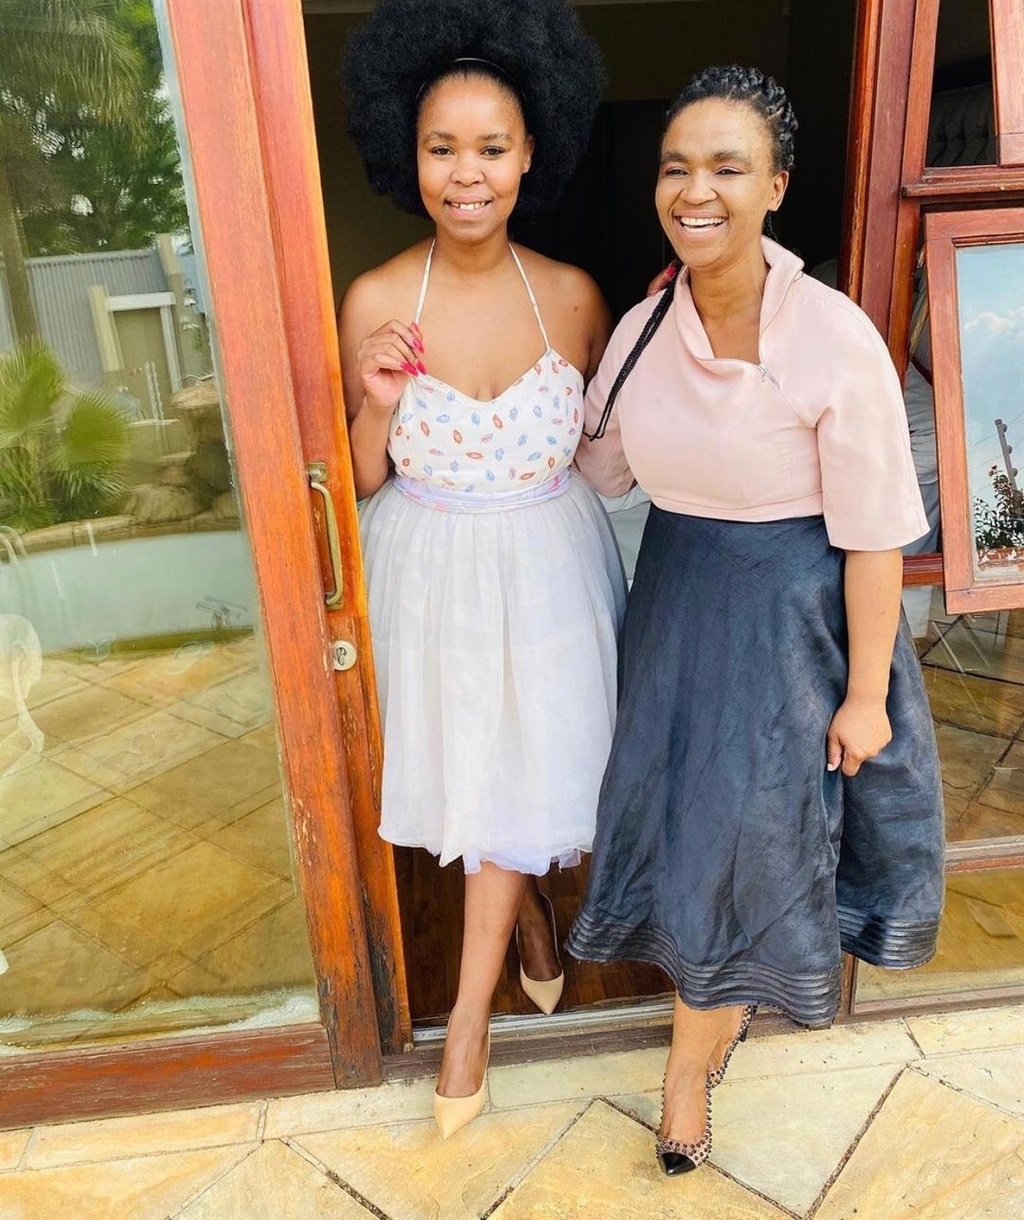 Singer and songwriter Zahara with her sister Nomonde